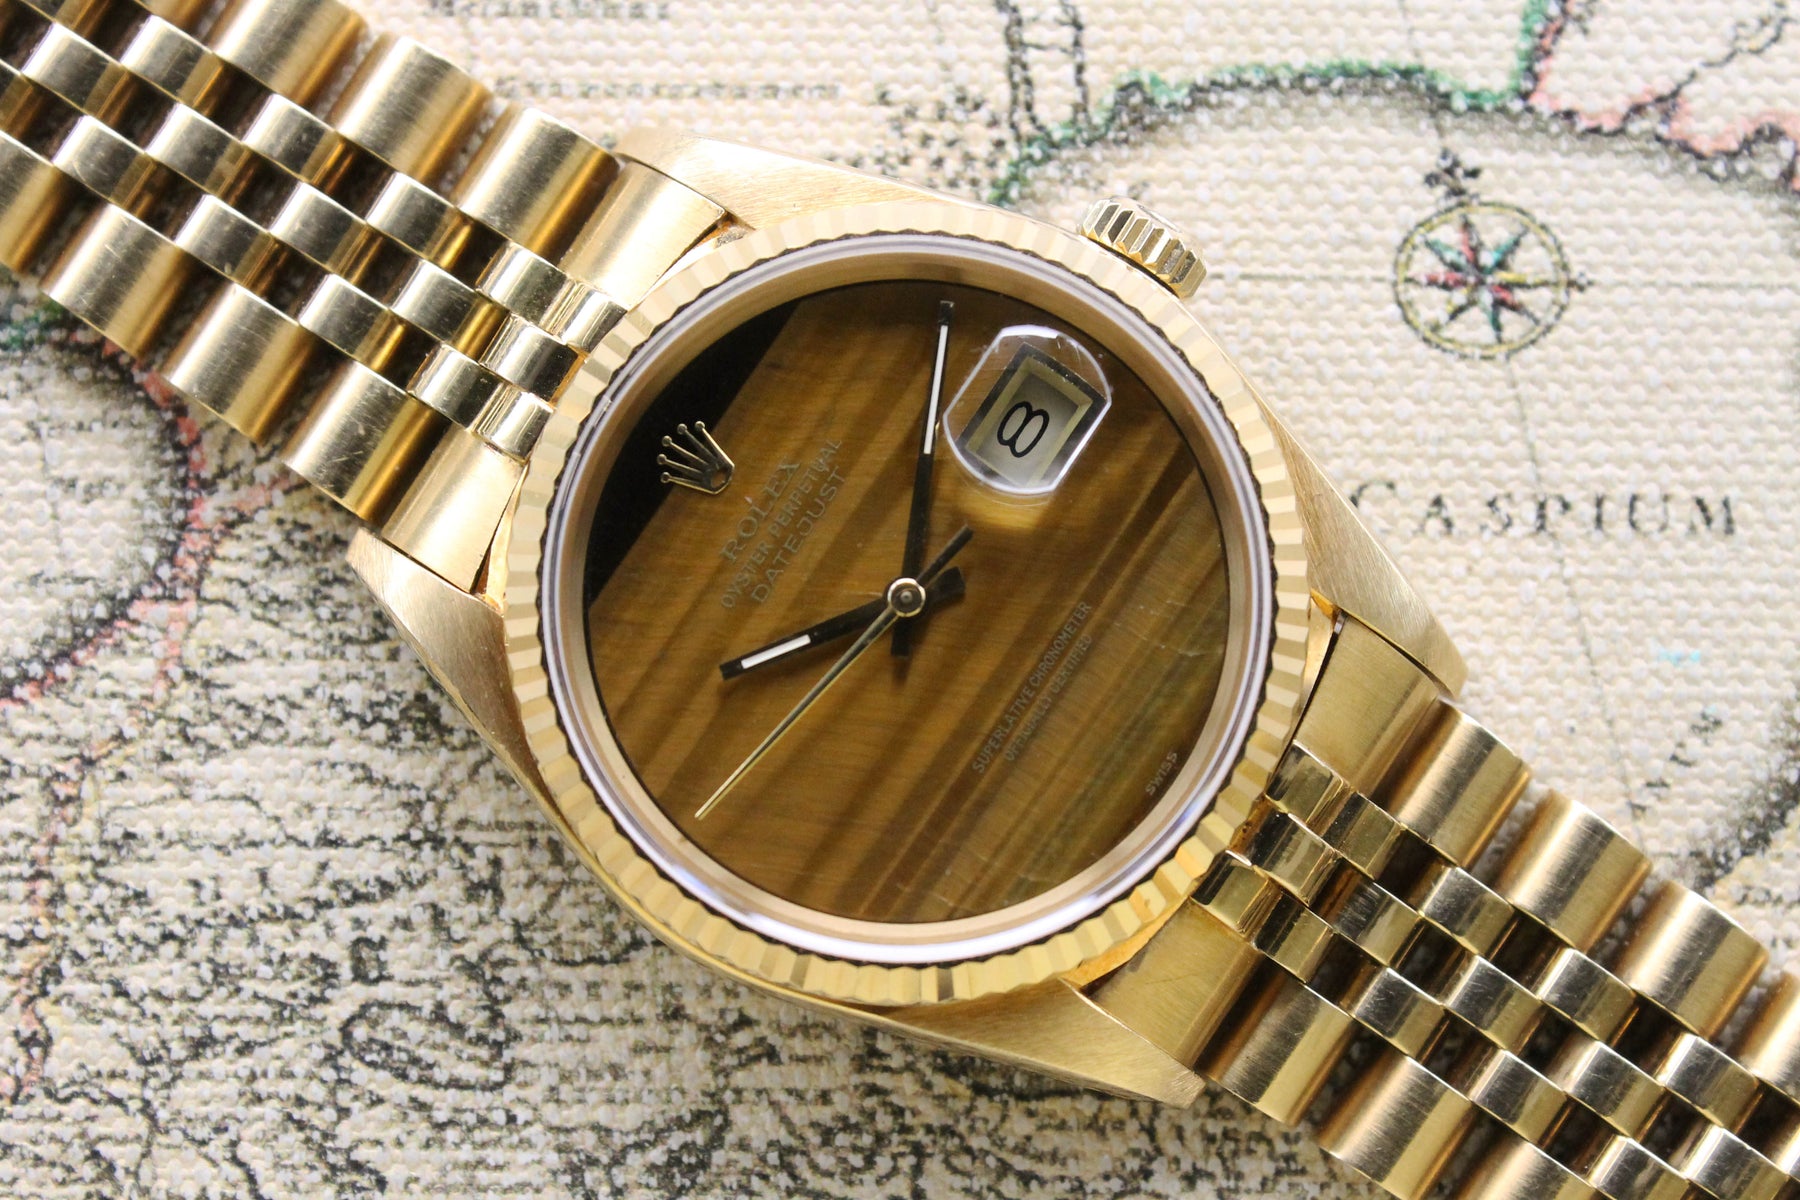 1985 Rolex Datejust Tiger Eye Ref. 16018 (with Certificate)